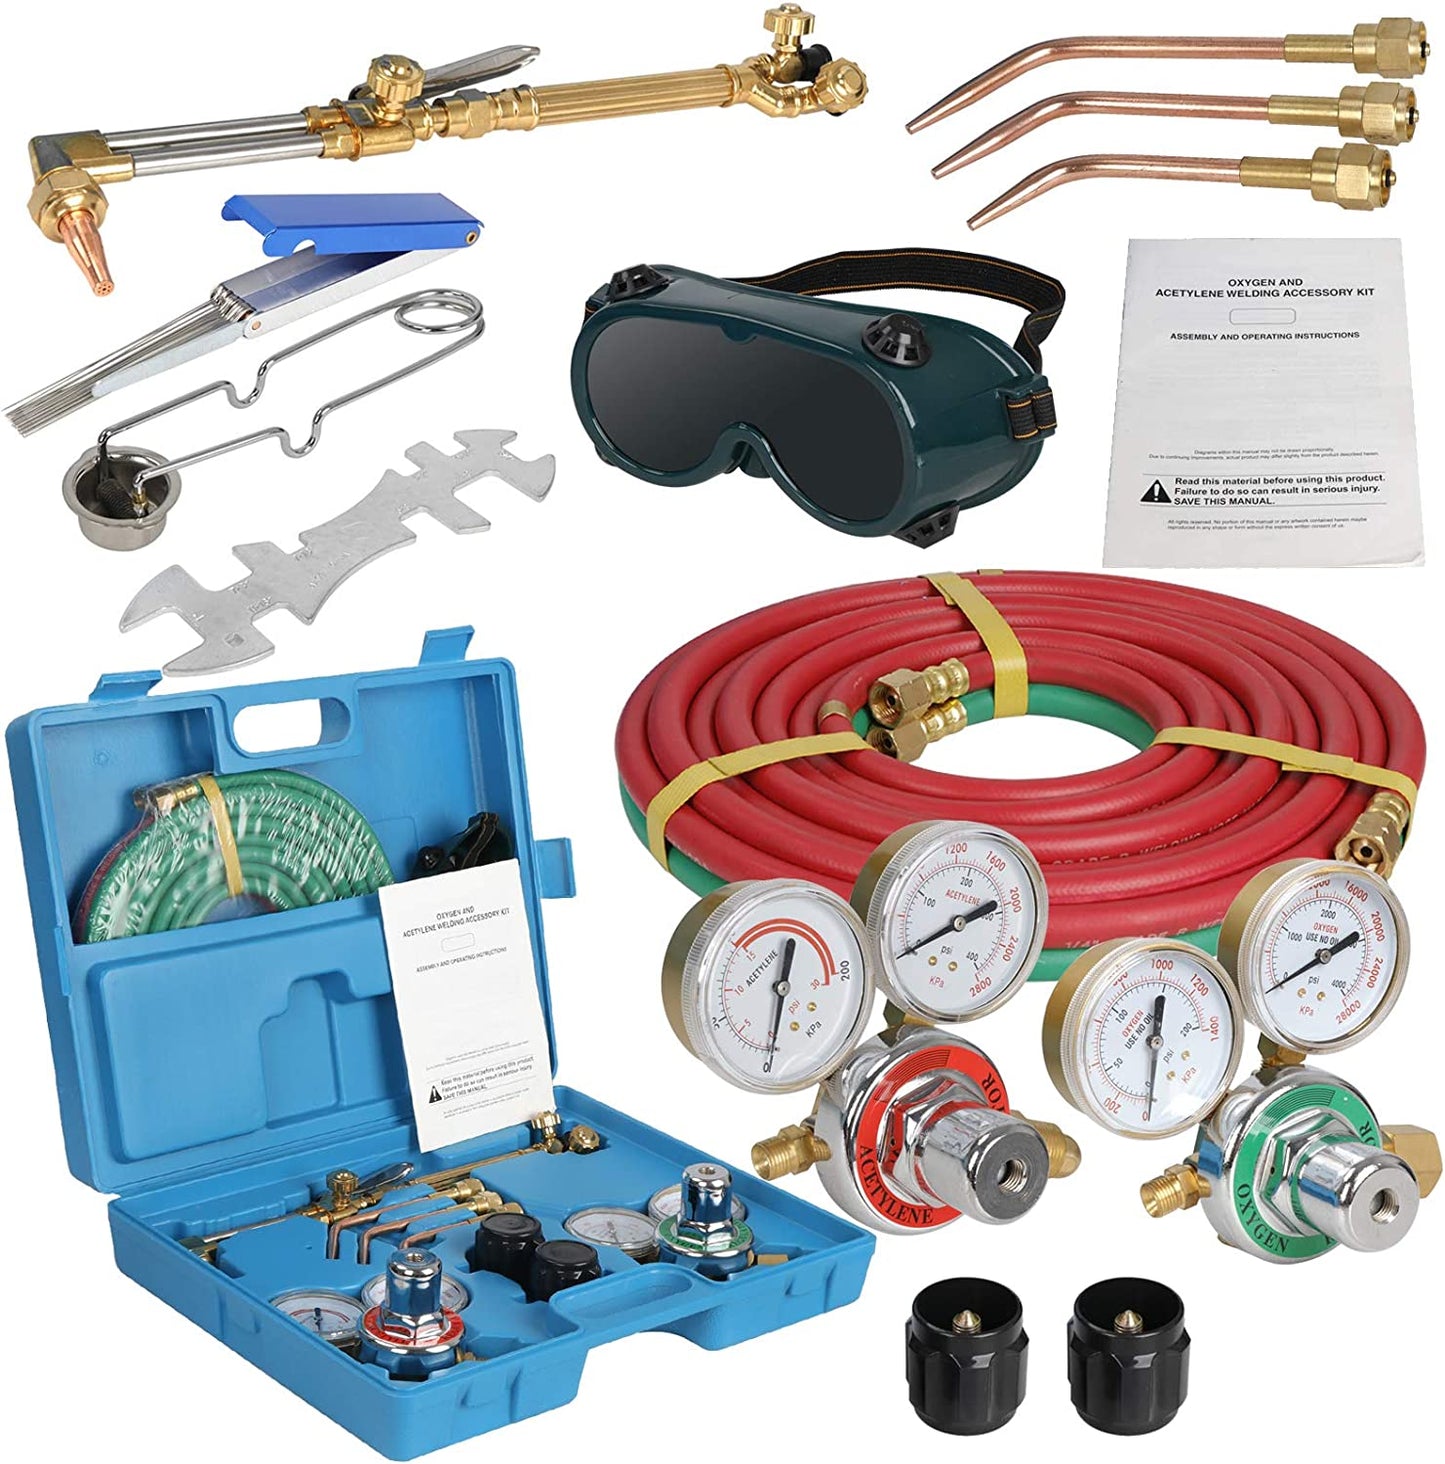 NEW Portable Gas Welding Cutting Torch Kit w/Hose, Oxy Acetylene Brazing Professional Set with Case